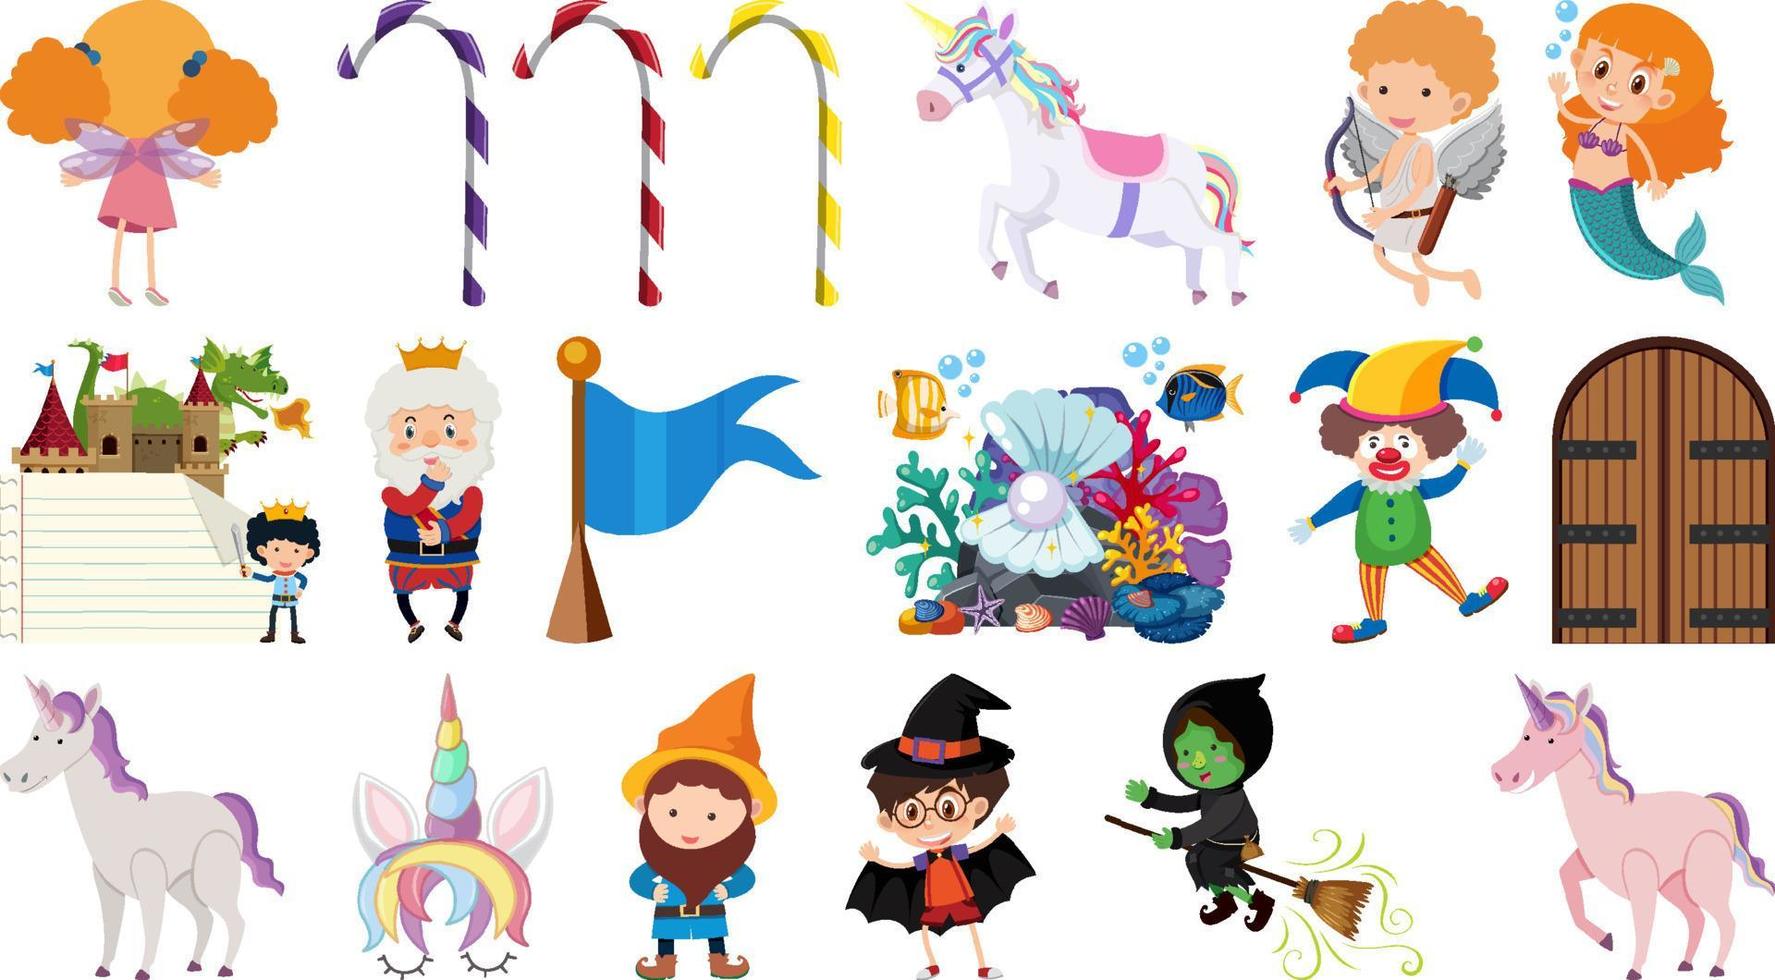 Set of isolated fairytale cartoon characters and objects vector